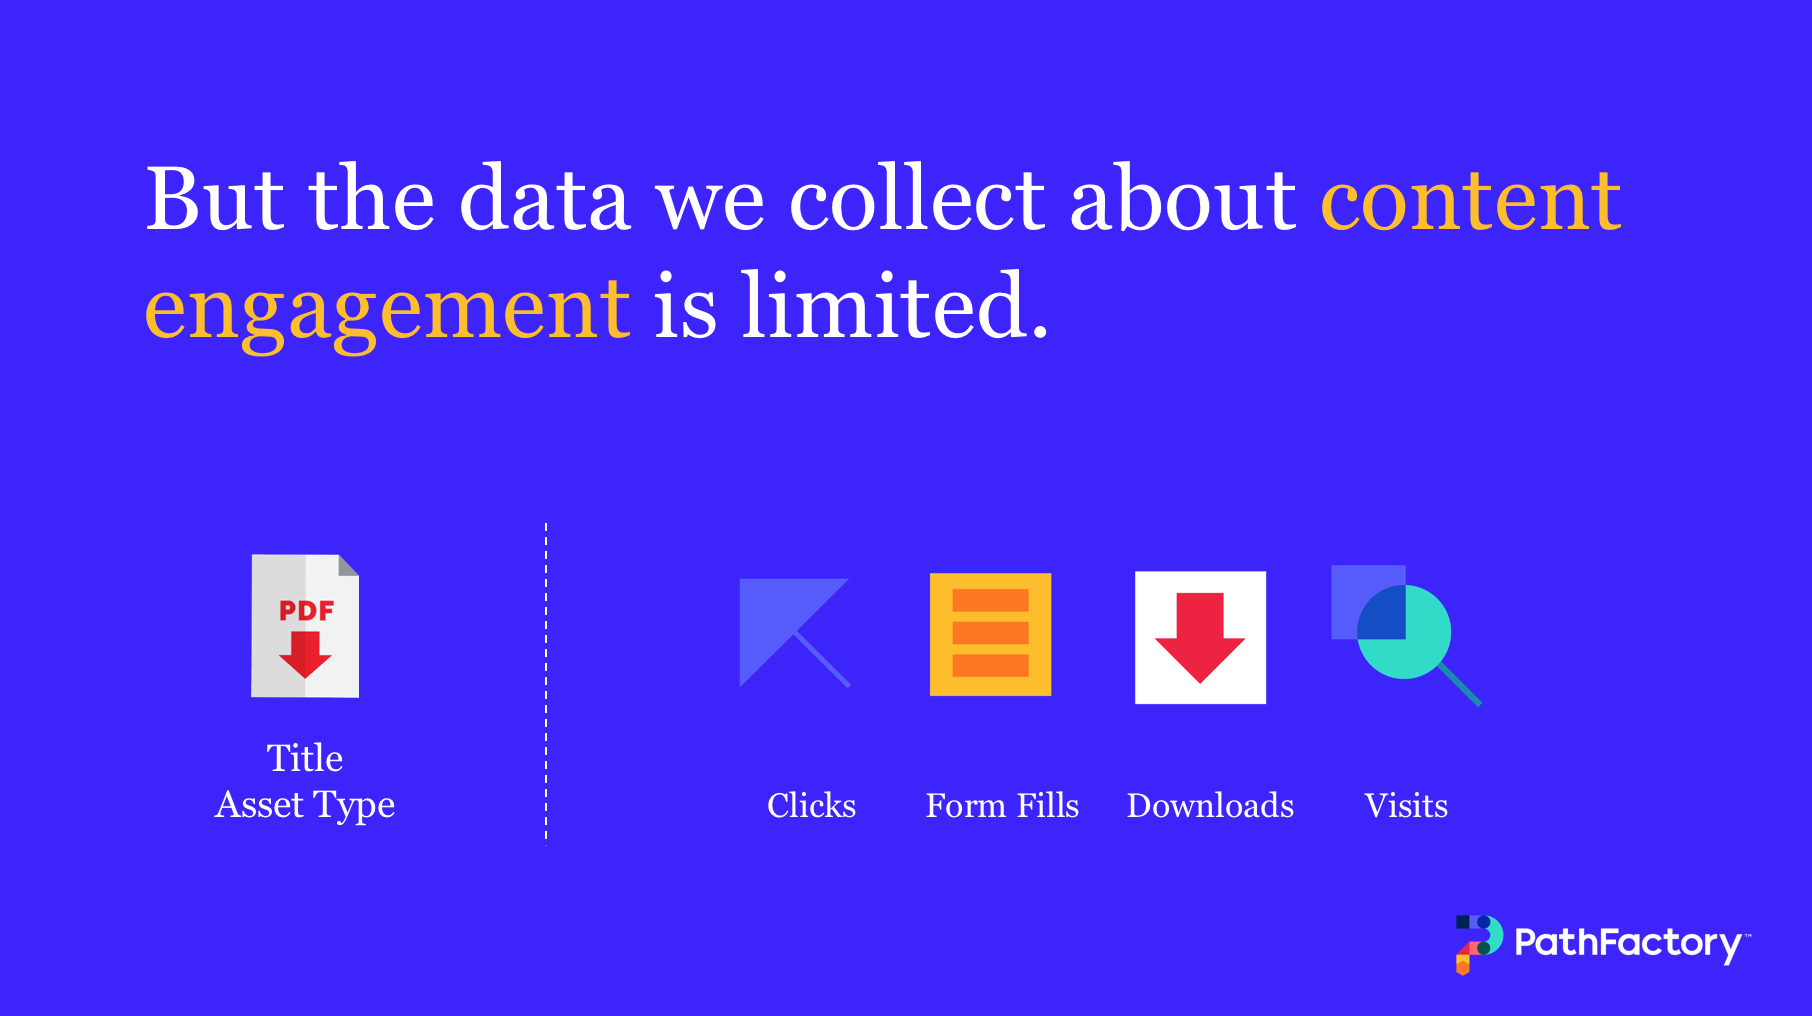 But the data we collect about content engagement is limited - Icon PDF - Title Asset Type - Data Collected Icons - Click, Form Fills, Downloads, Visits  Plus PathFactory Logo